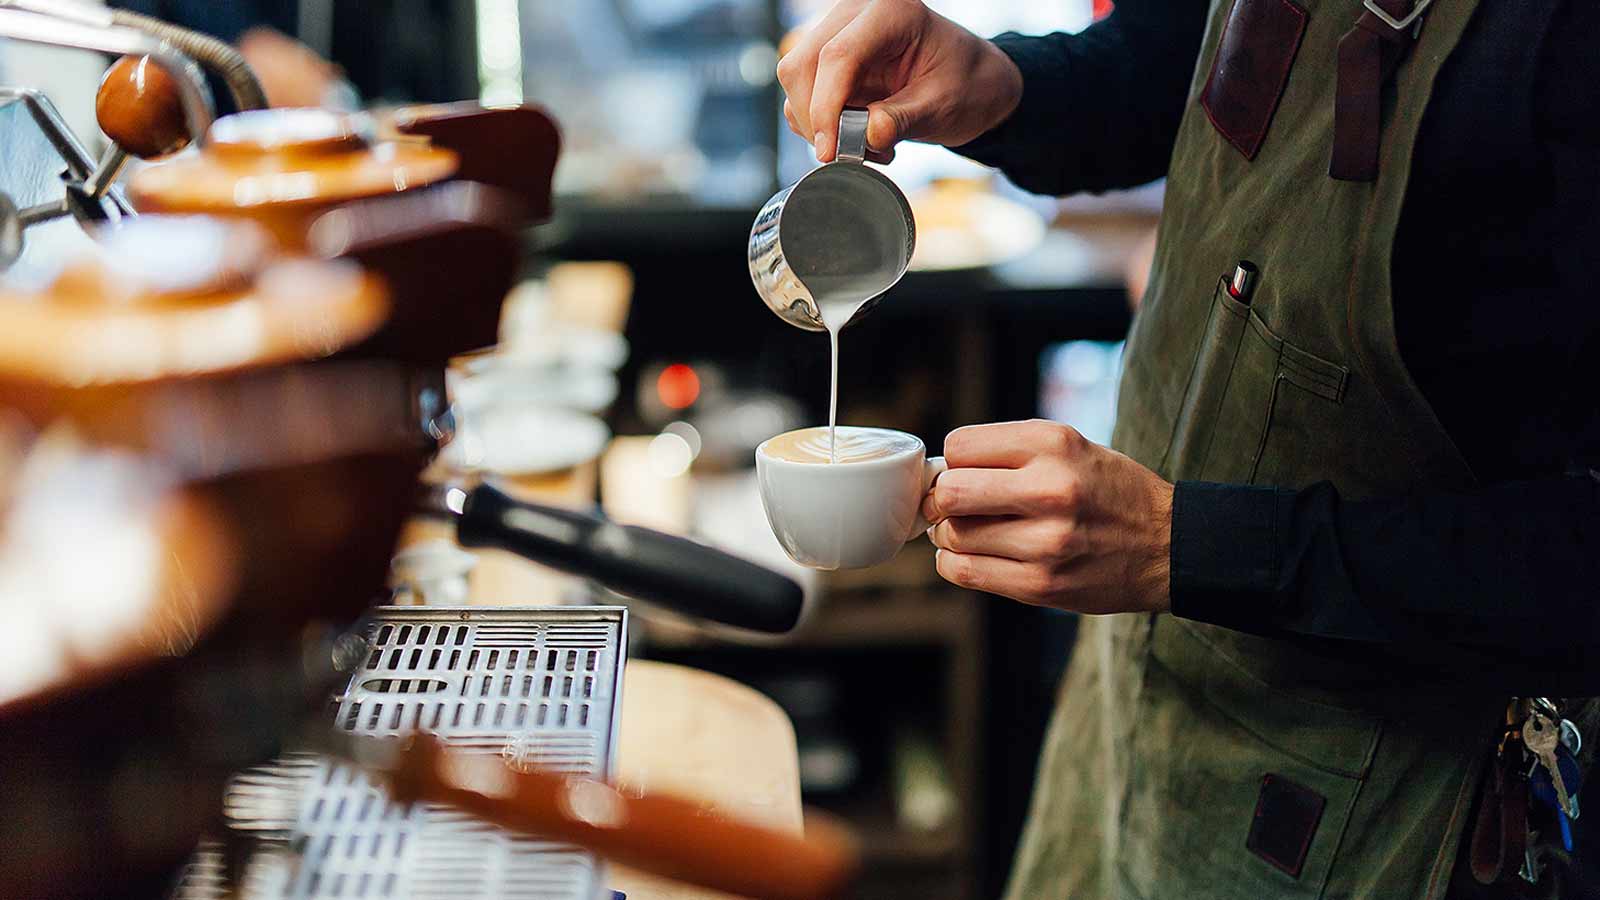 Get Ready To Start Paying $7 For A Cup Of Coffee, Australia